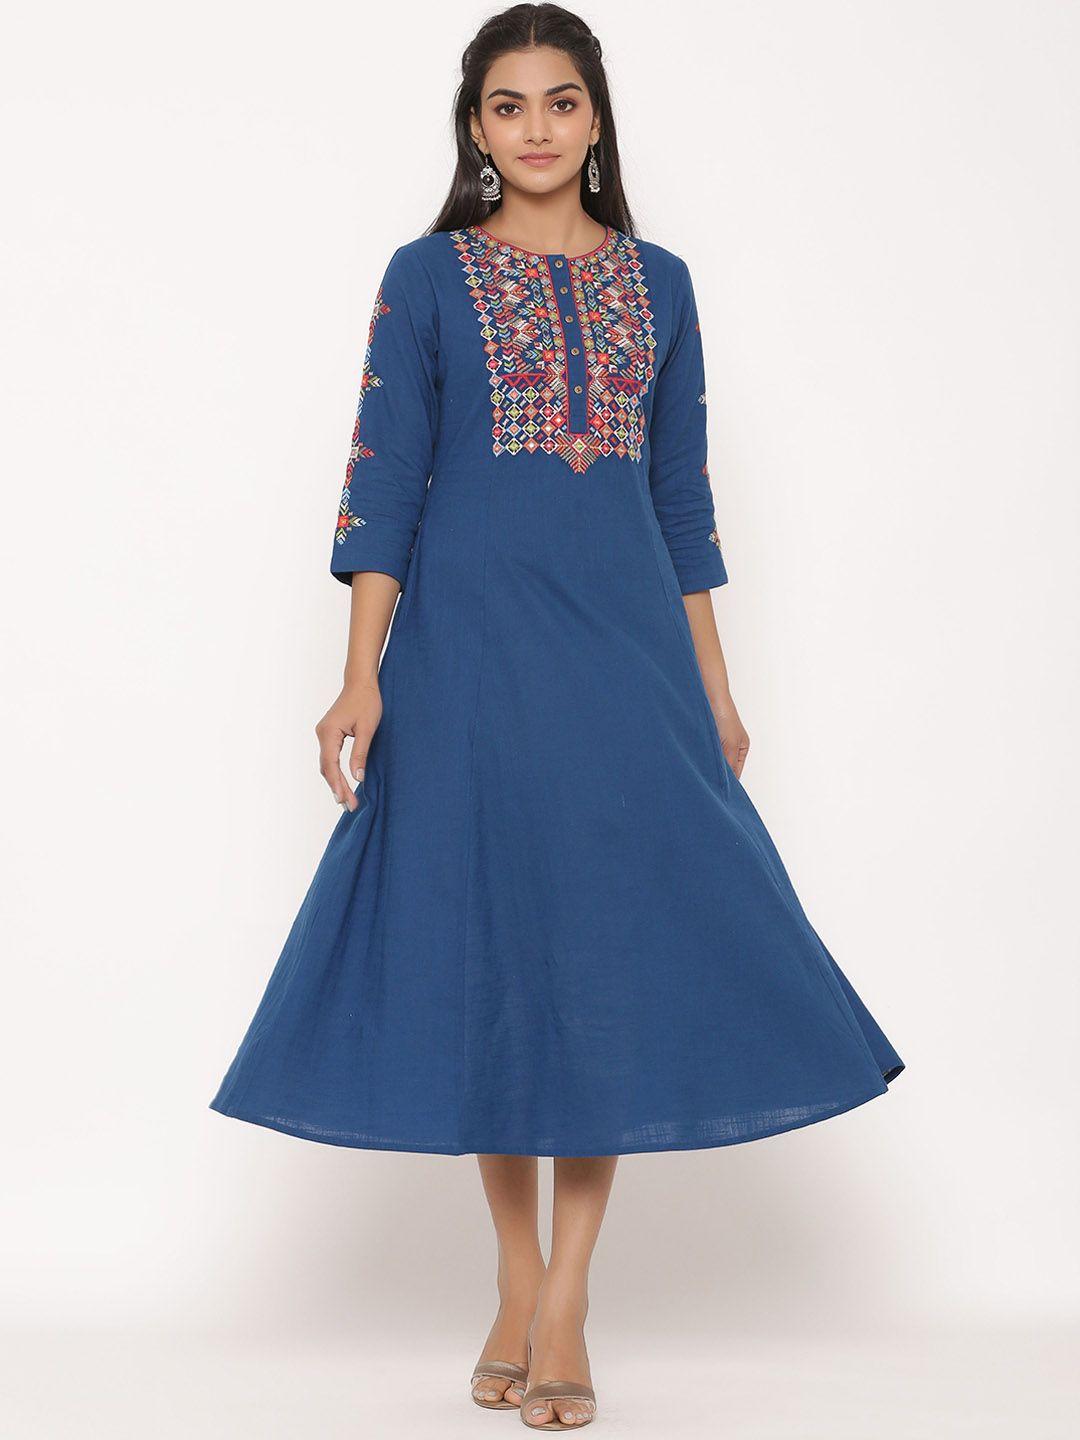 fabglobal women blue embroidered a-line dress